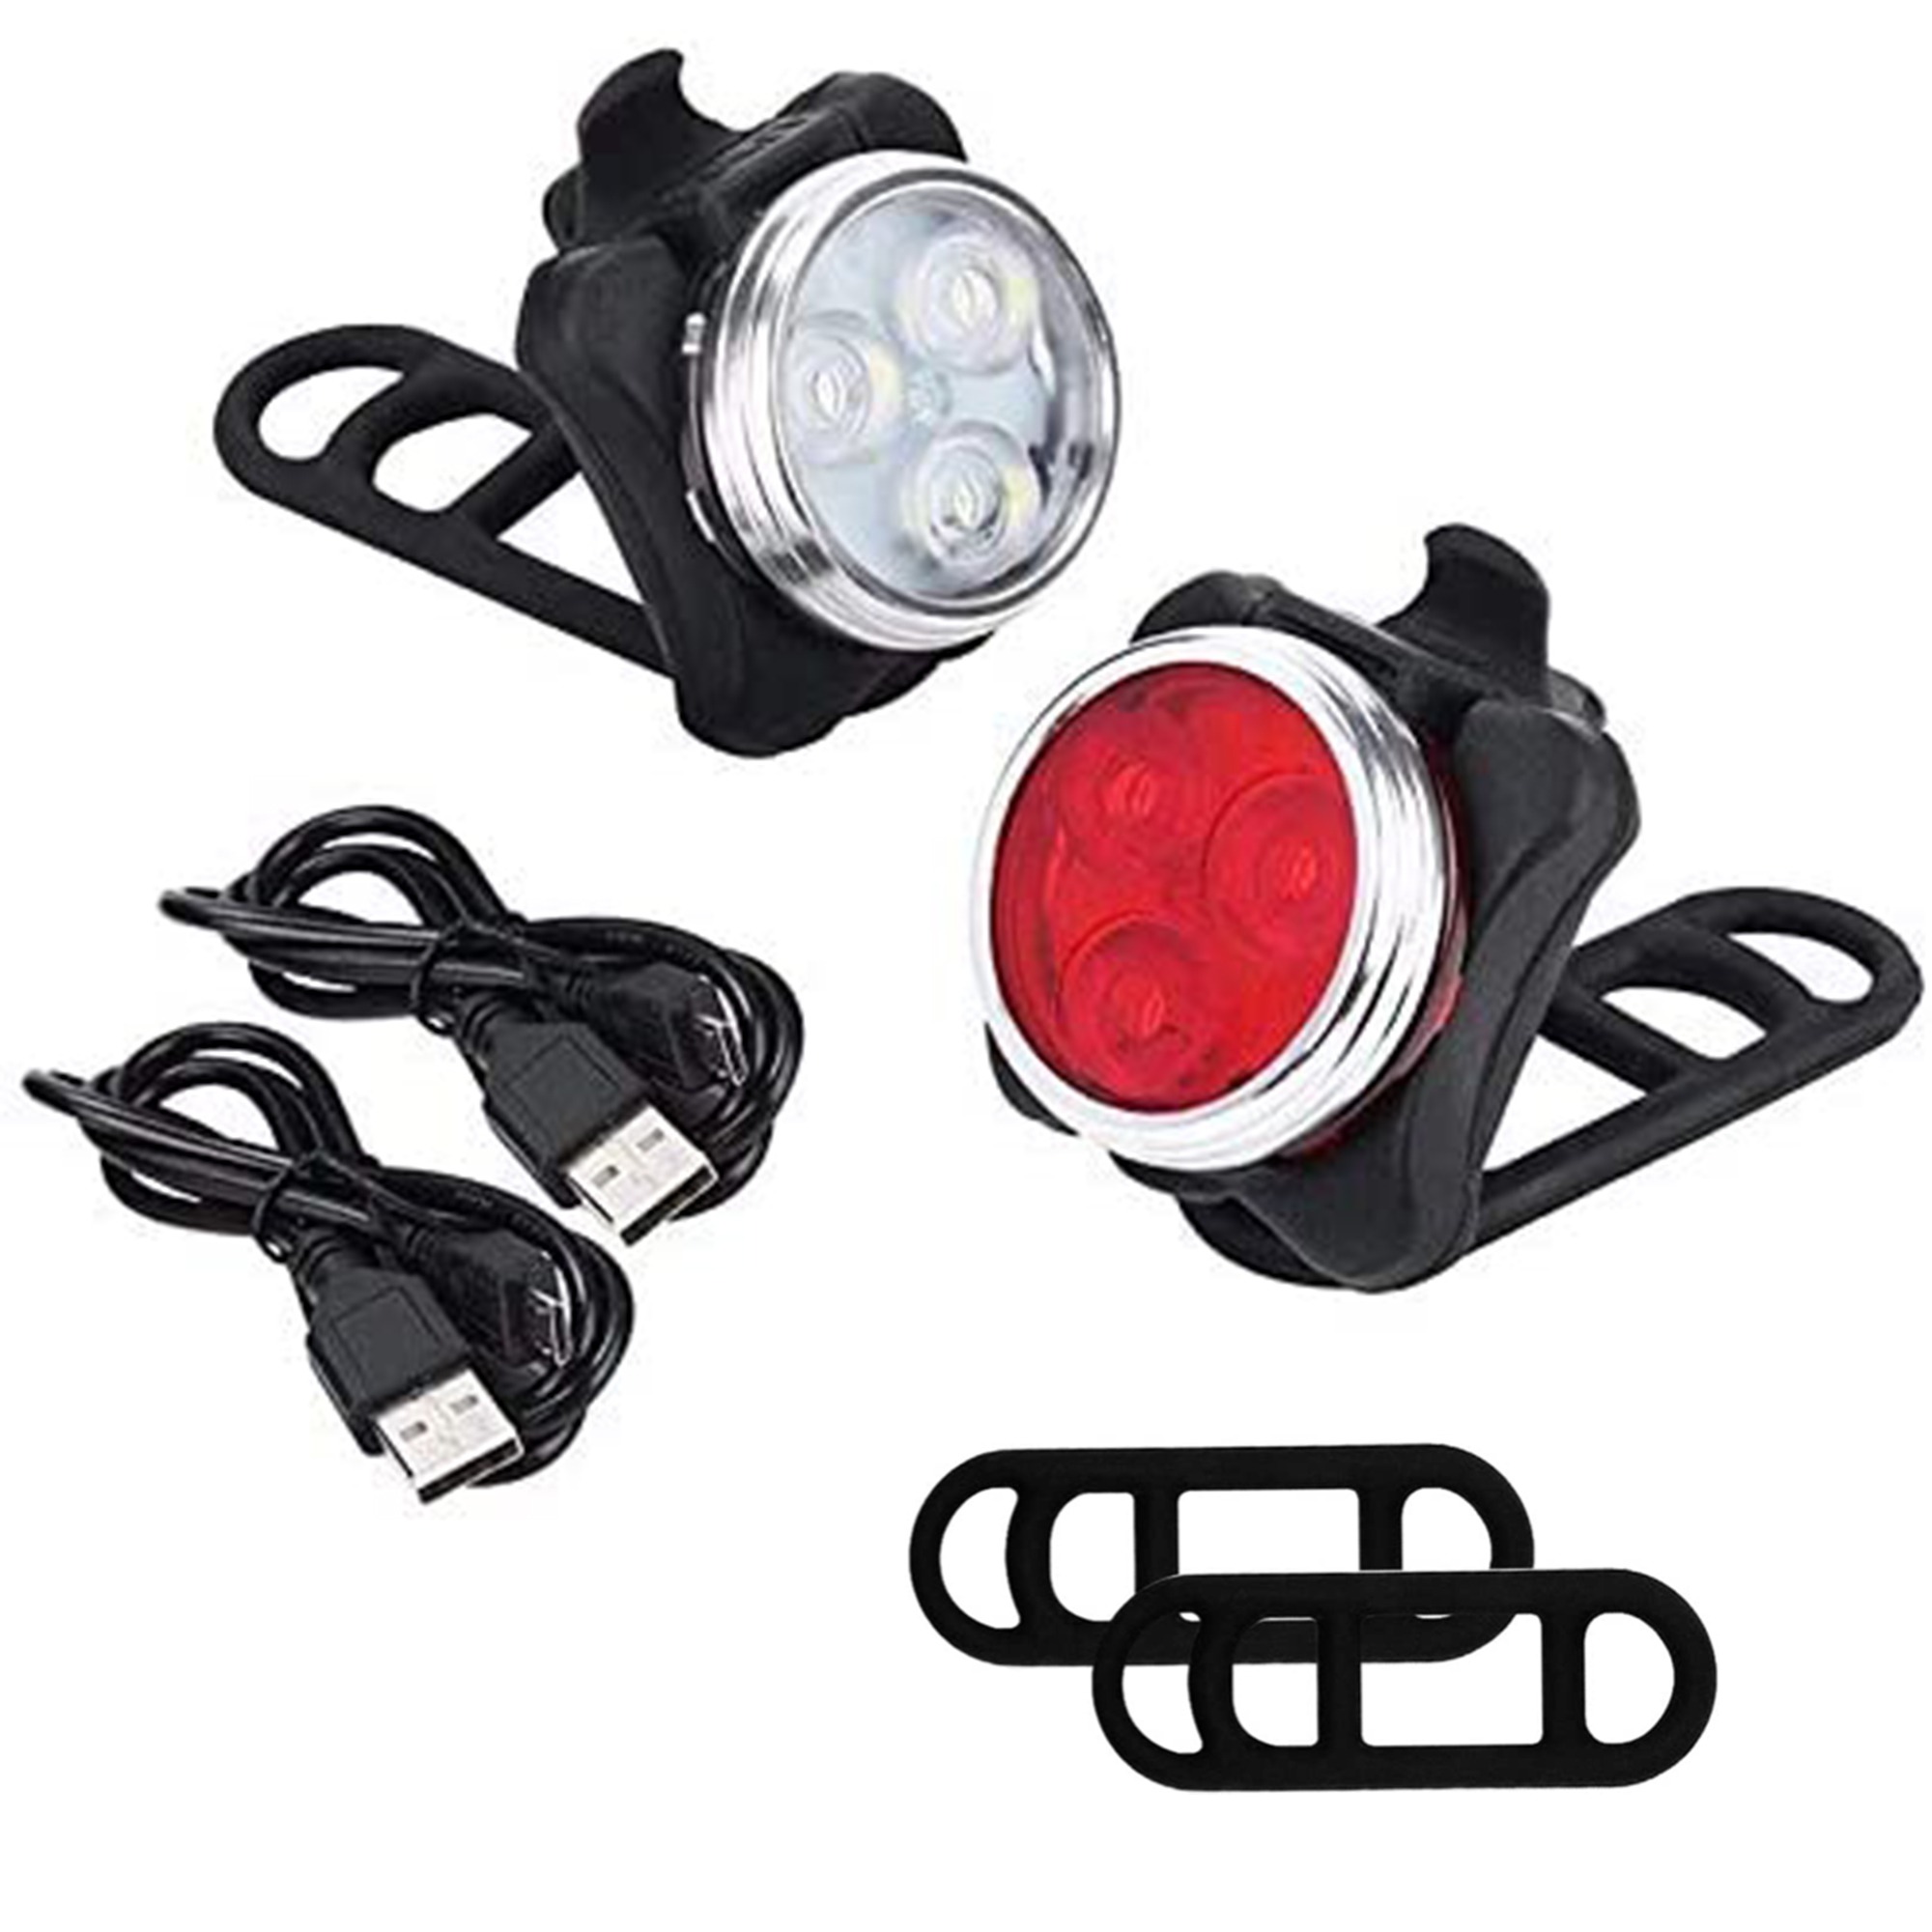 4-In-1 LED Waterproof Bright Cycling Light with Bicycle Horn Bike Phone Holde & Power Bank IPX65 Waterproof Bike Headlight for Android ISO USB Rechargeable Bike Front Light Set Bike Headlight 